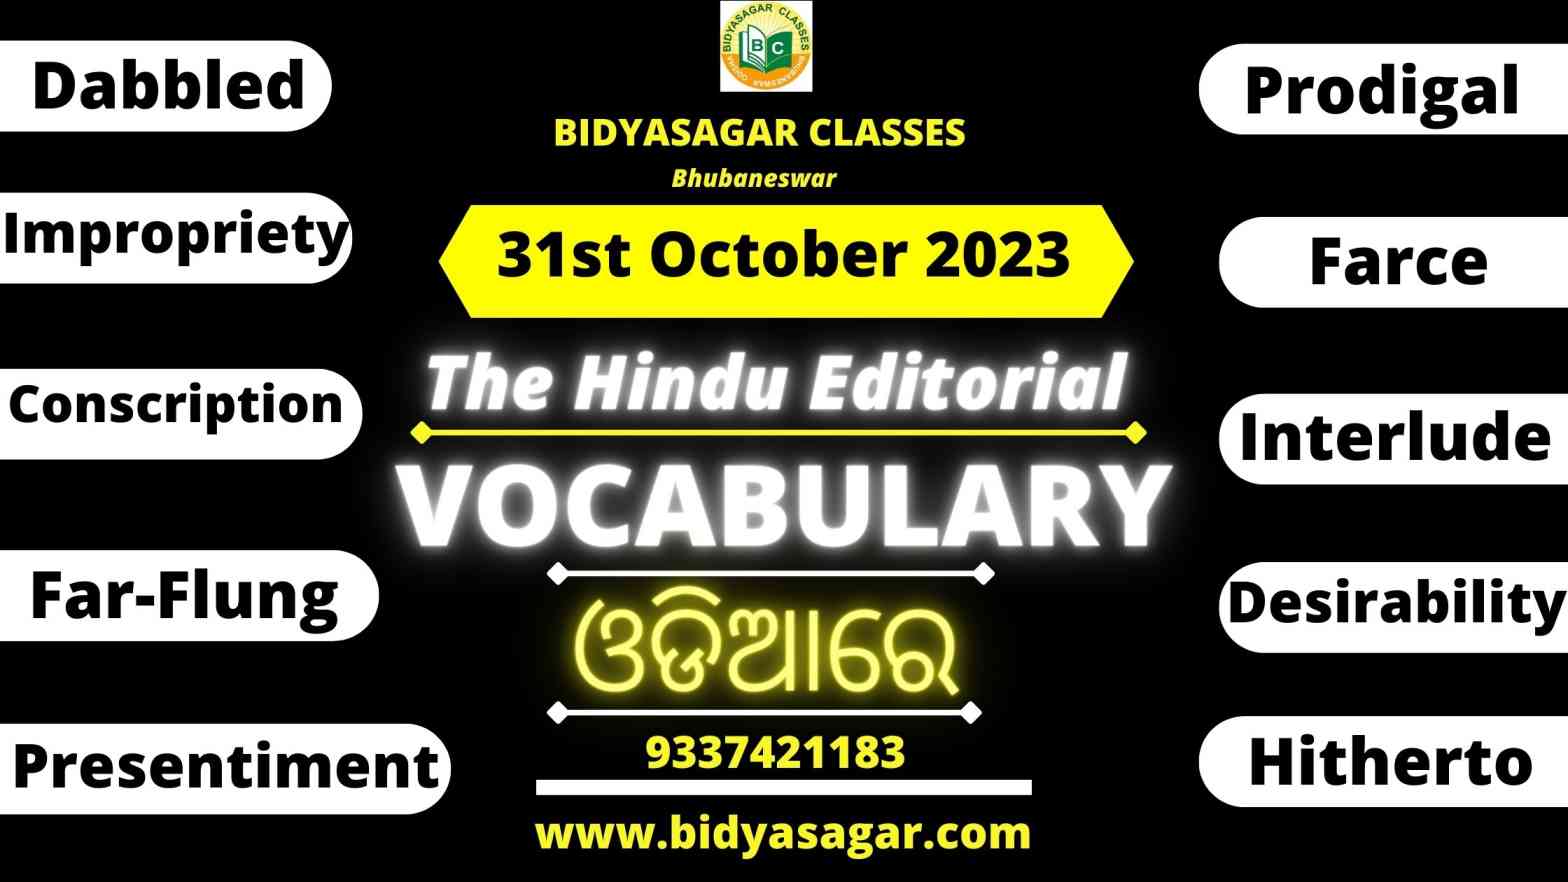 The Hindu Editorial Vocabulary of 31st October 2023